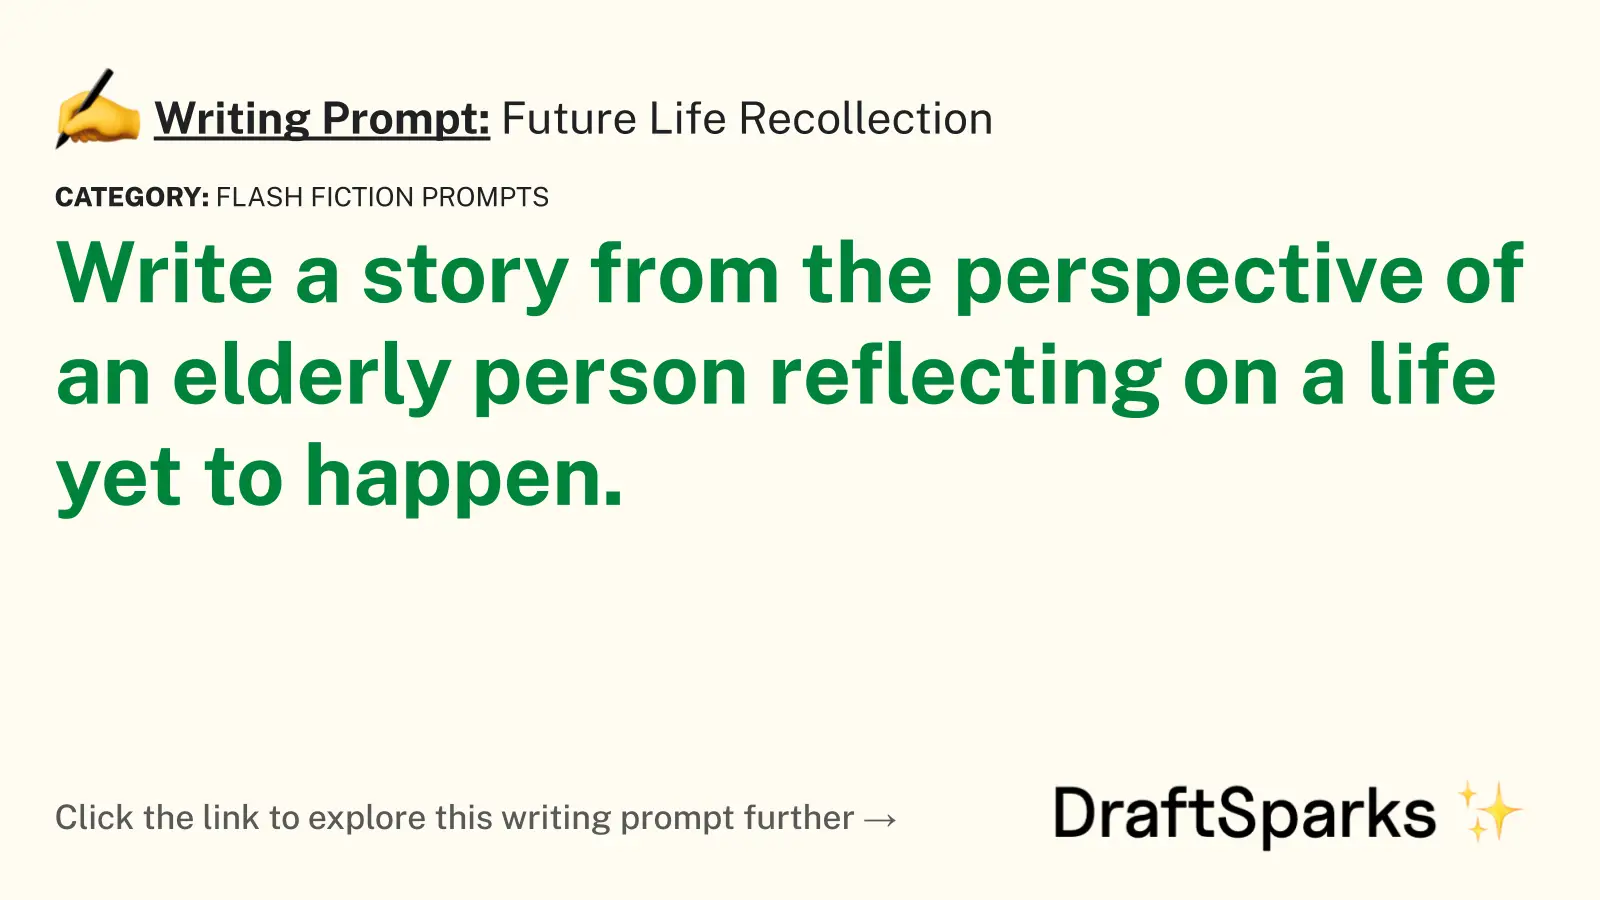 Future Life Recollection